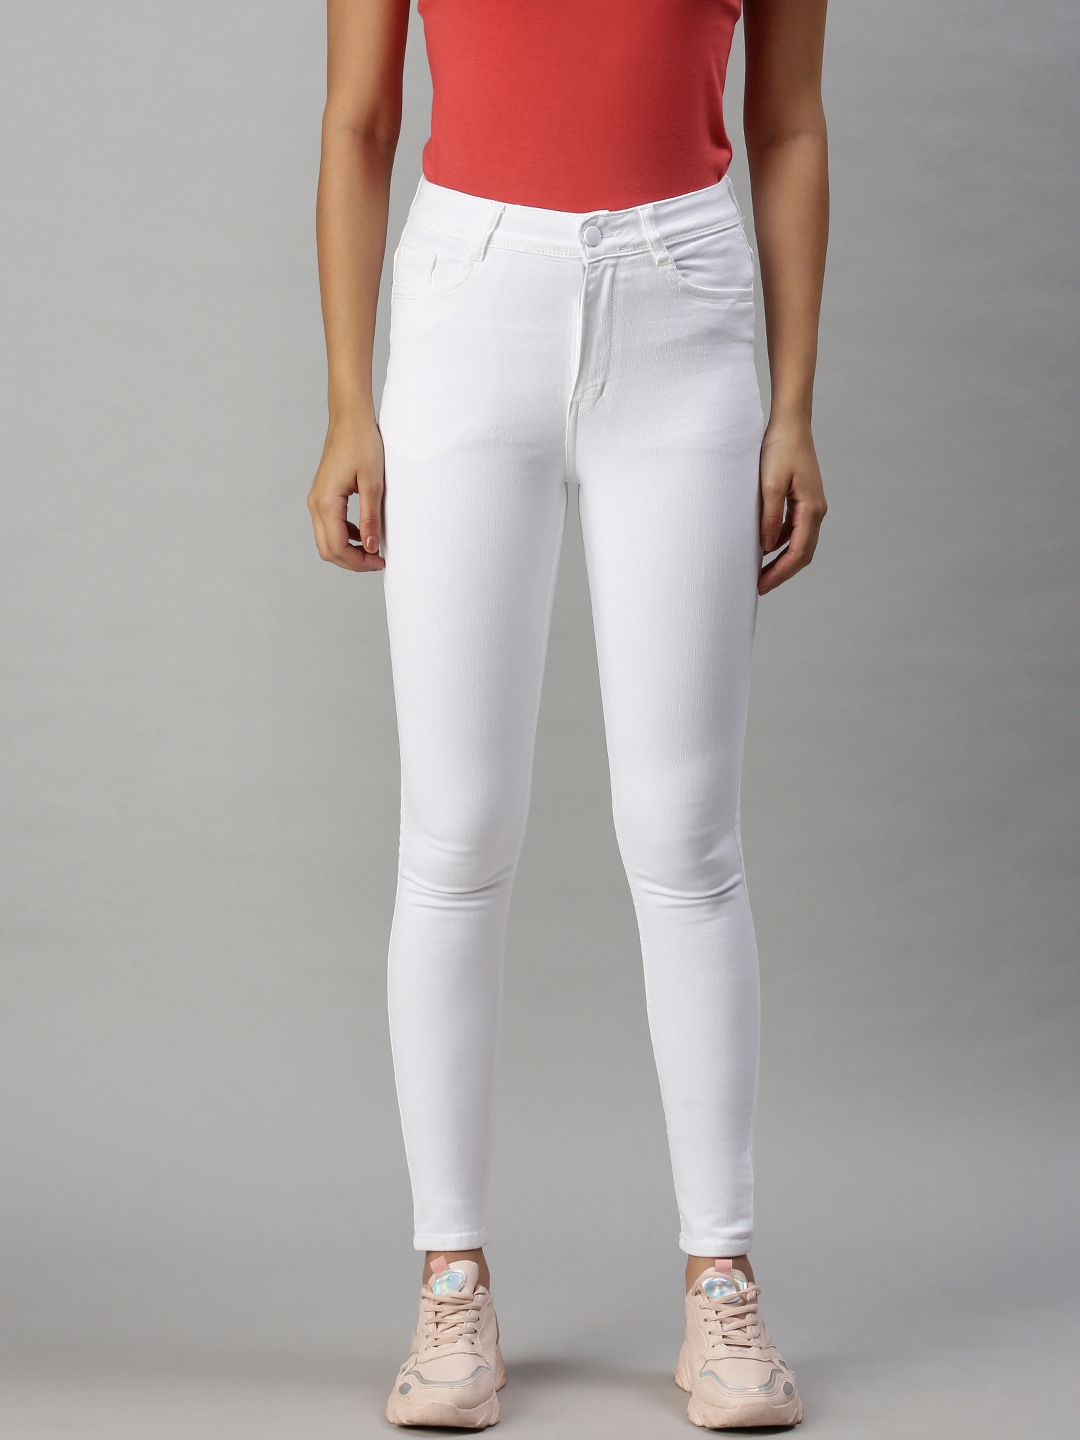 Showoff | Showoff Women's Casual Slim Fit High-Rise White Jeans